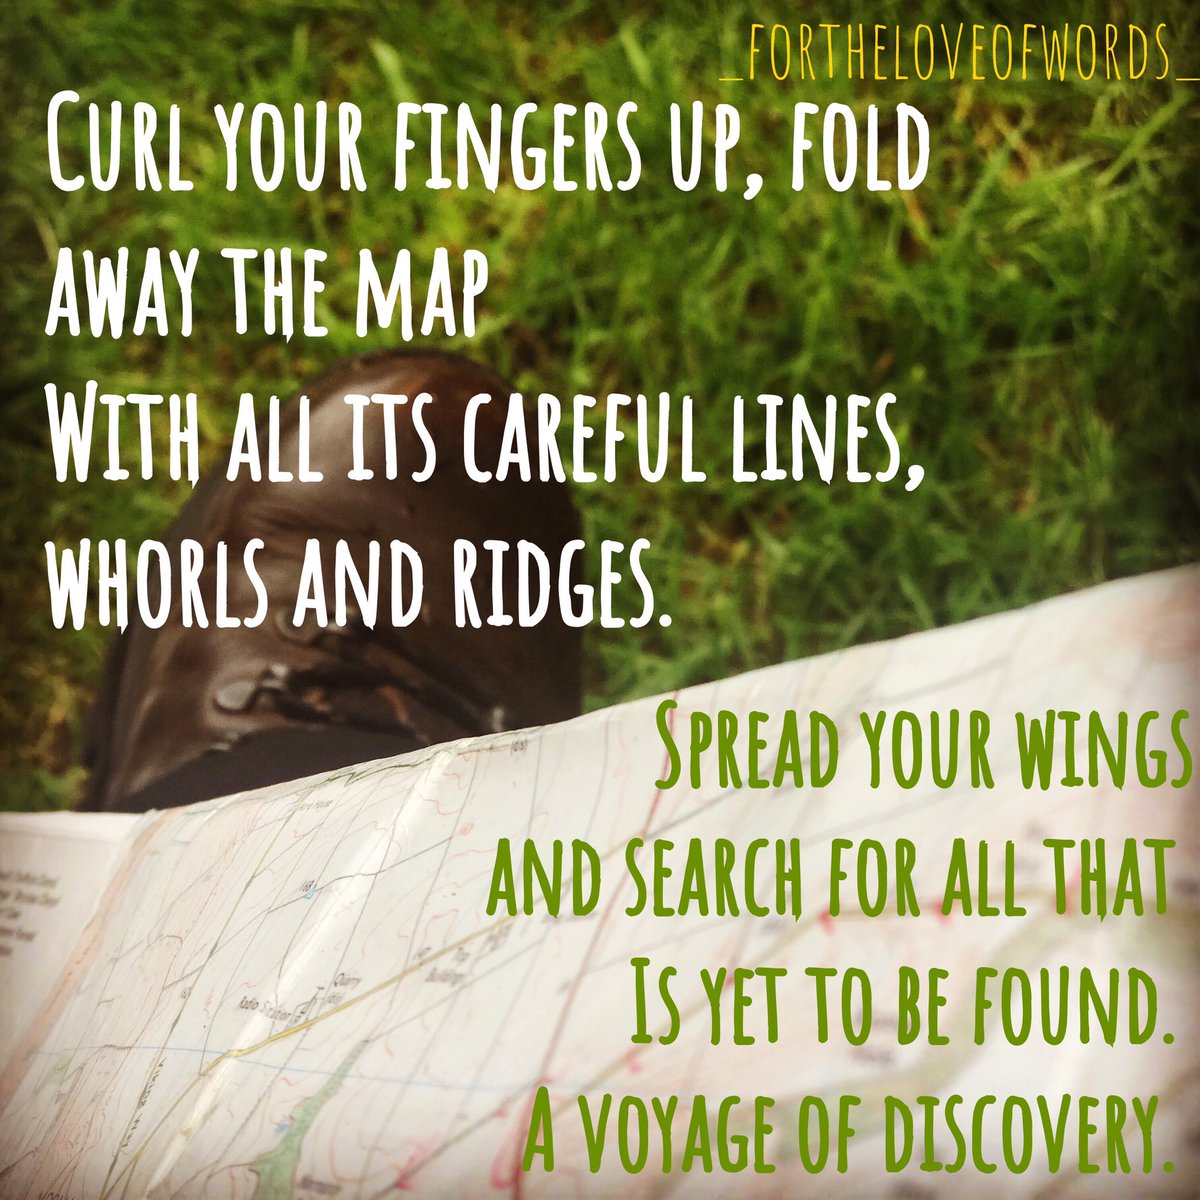 Study your fingertip and wonder
What your personal lines, whorls and ridges,
Would look like in earth form;
How your map is raised into reality.
#greatoutdoors @ordnancesurvey #maps #contours @dofeuk #poetry #voyage #discovery #explore #voyageofdiscovery #fortheloveofwords